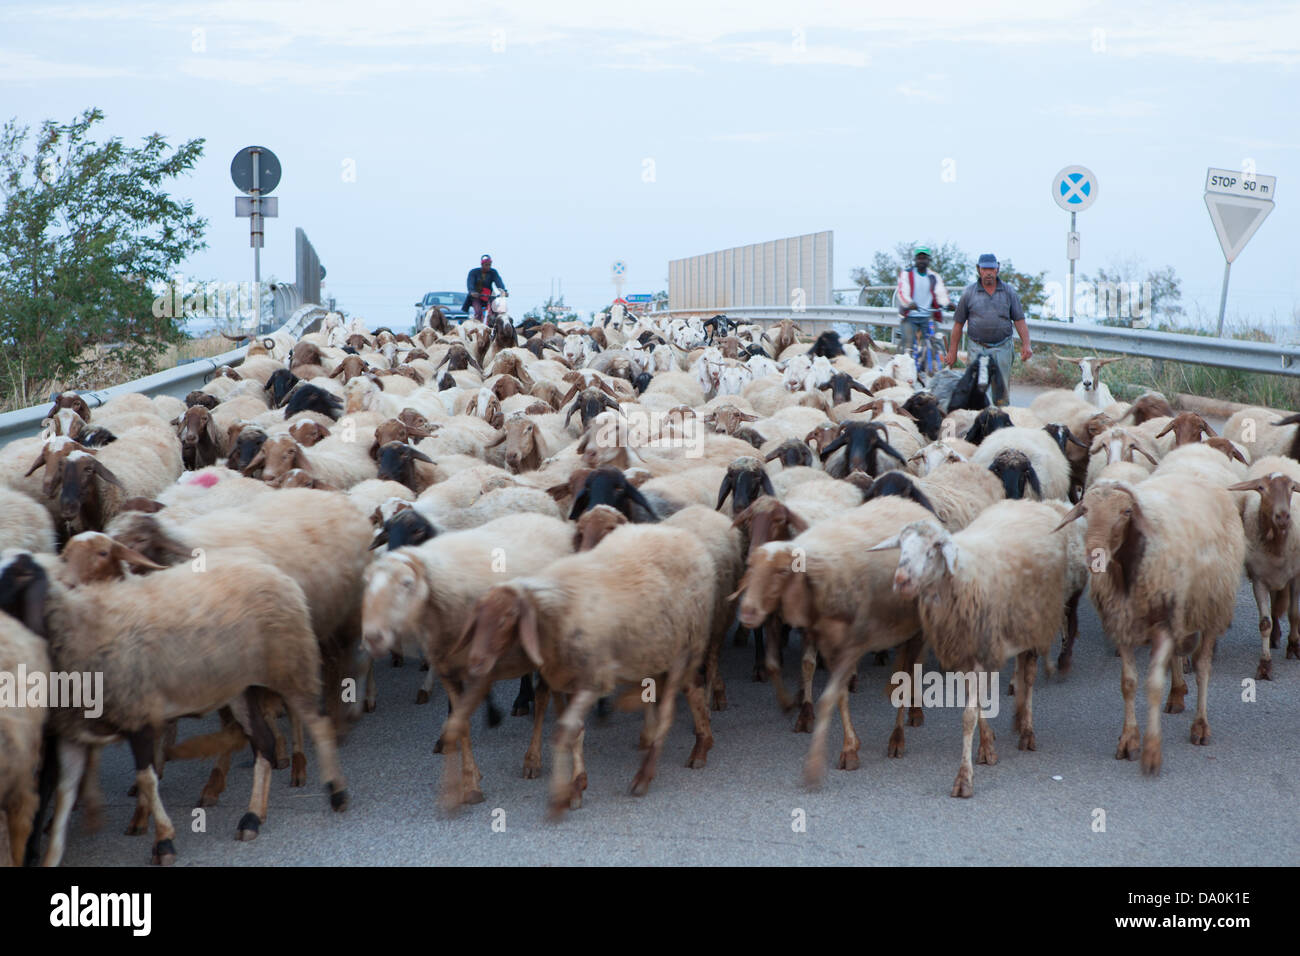 A flock of sheep on a road, Apulia, Italy Stock Photo